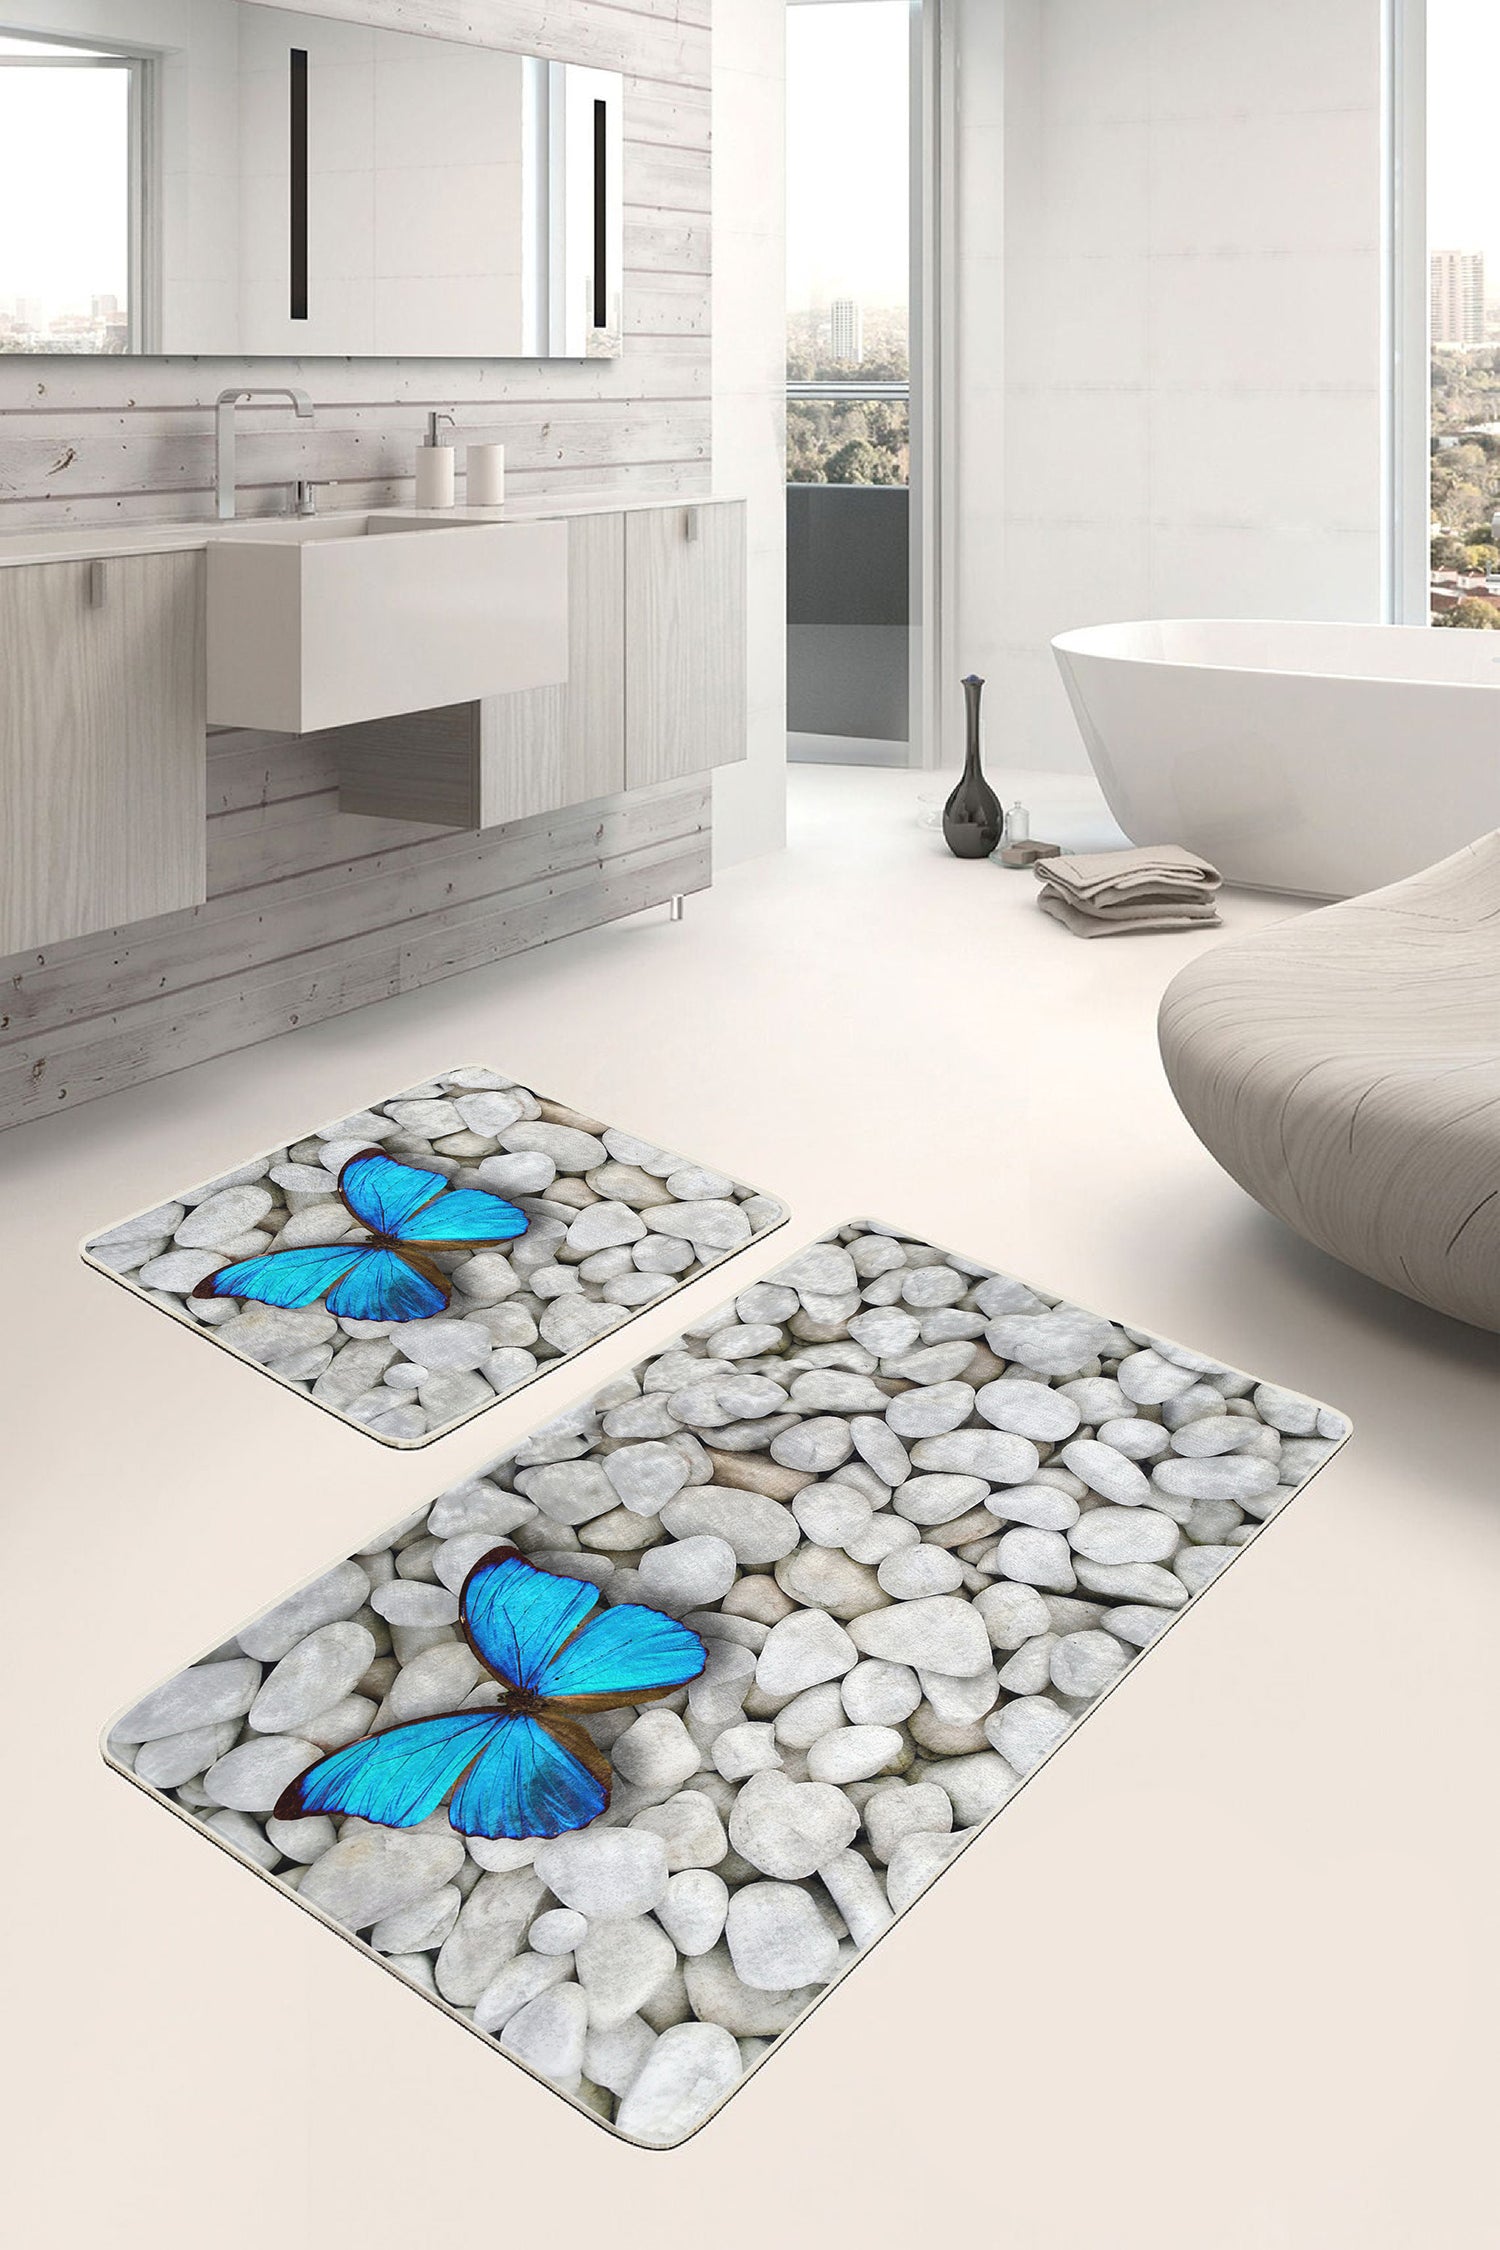 Chic and Inviting Mat with Blue Butterflies for a Trendy Bathroom